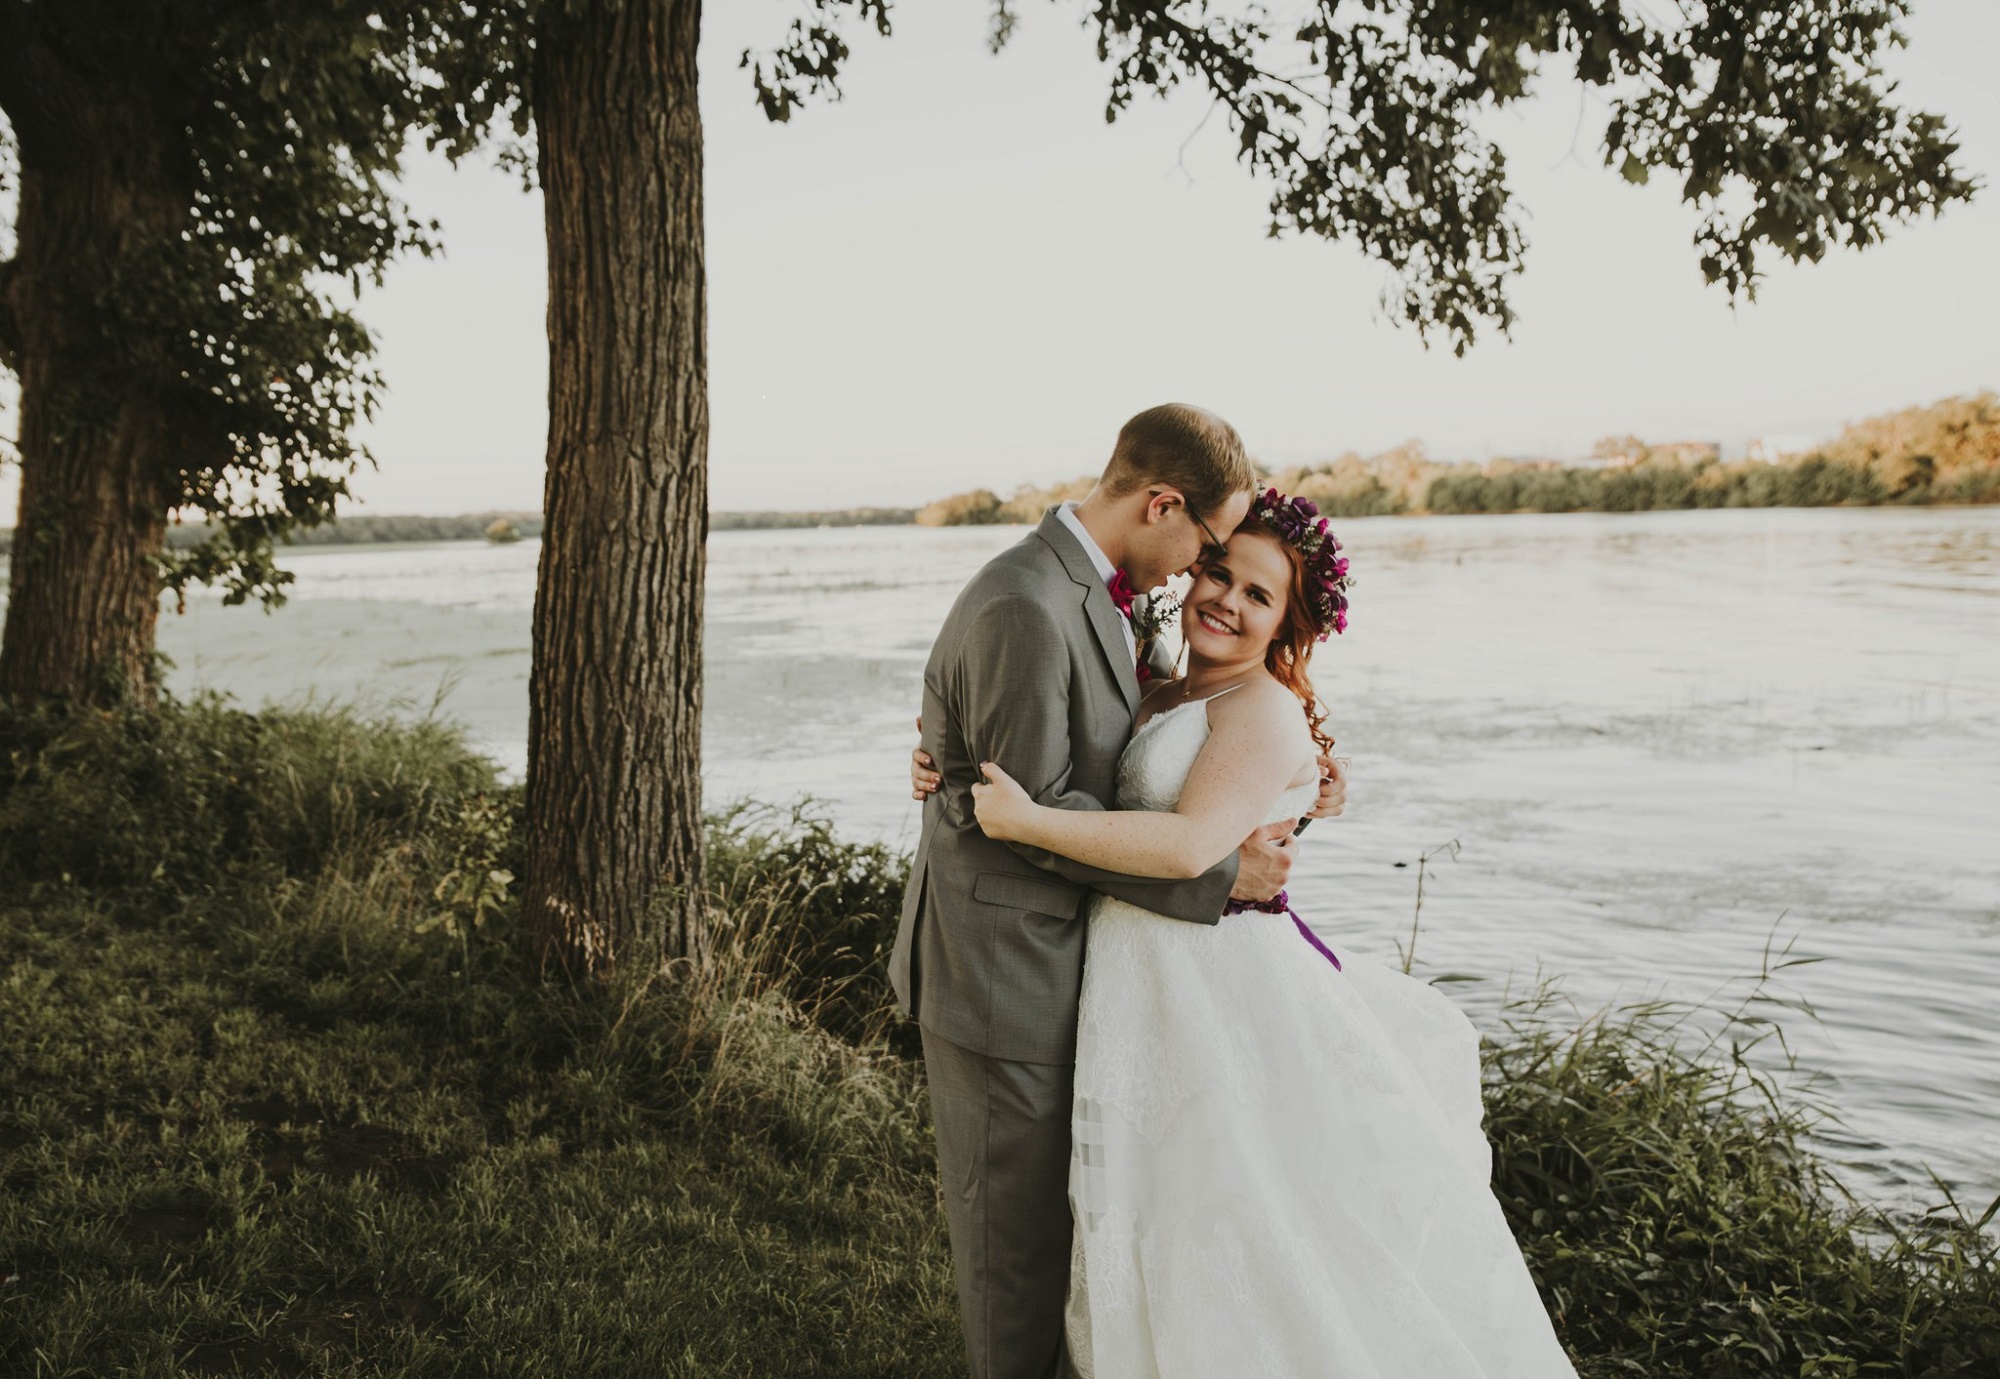 A wedding couple embracing by a river.